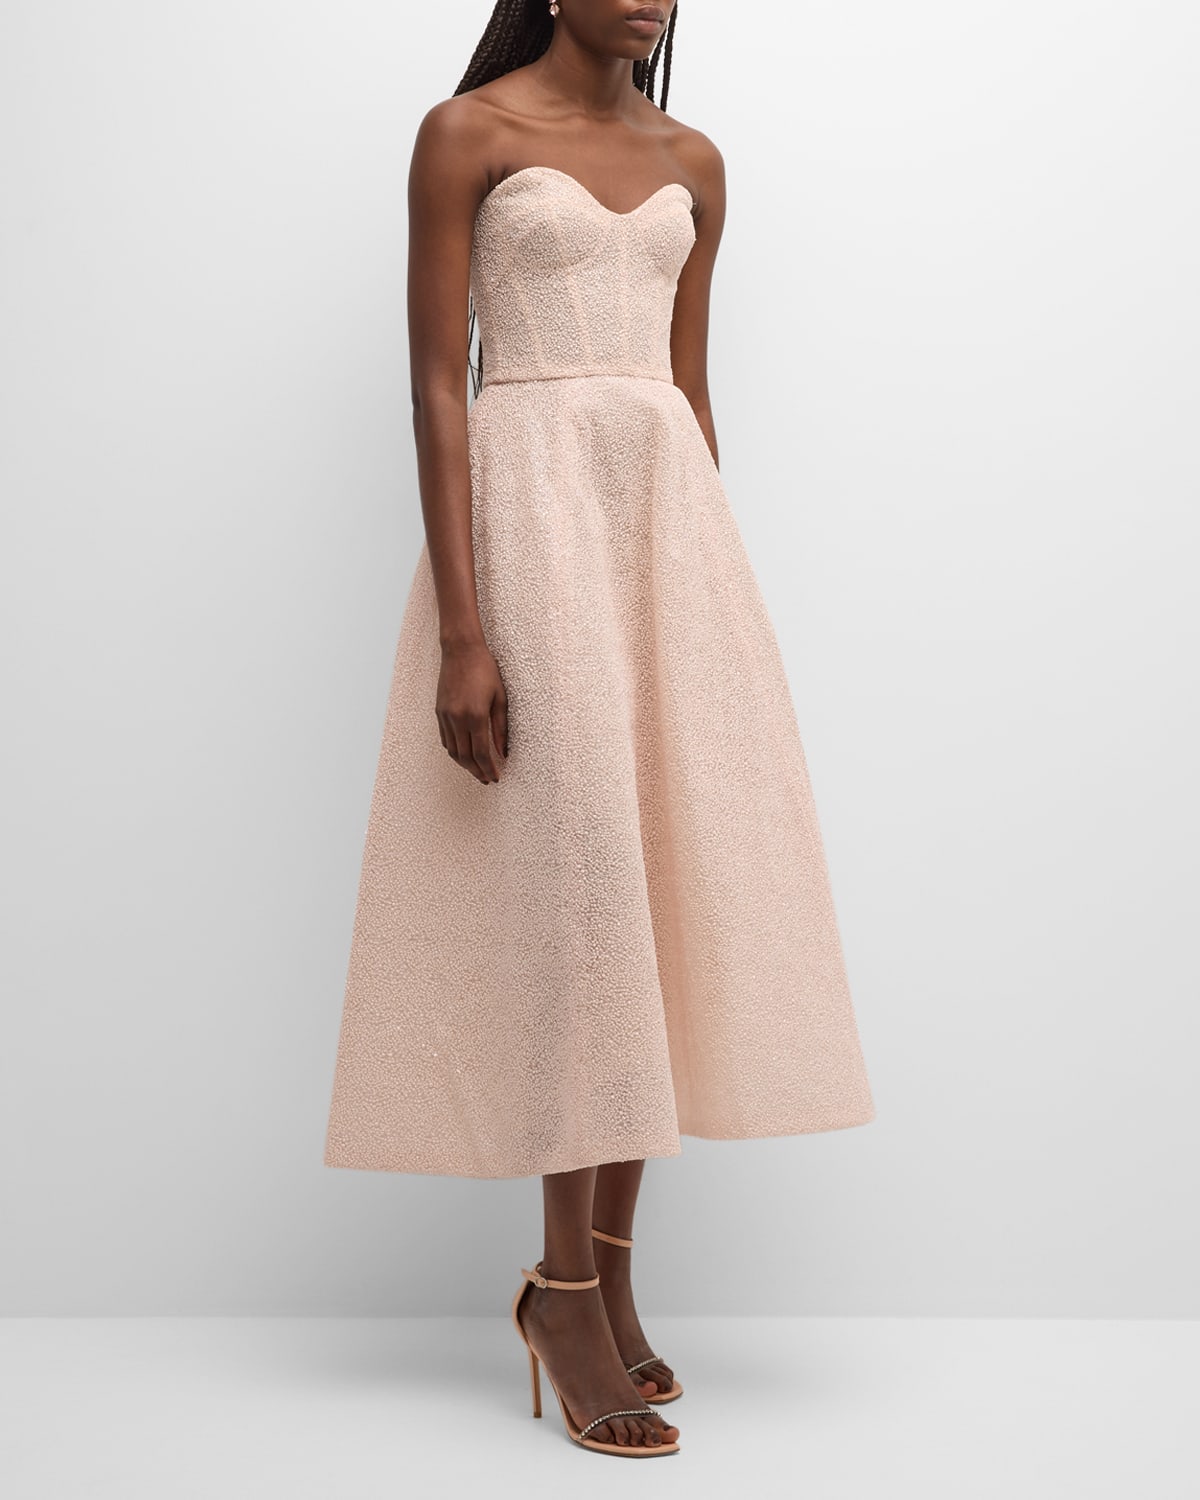 Monique Lhuillier Strapless Textured Embroidered Dress In Light Pink